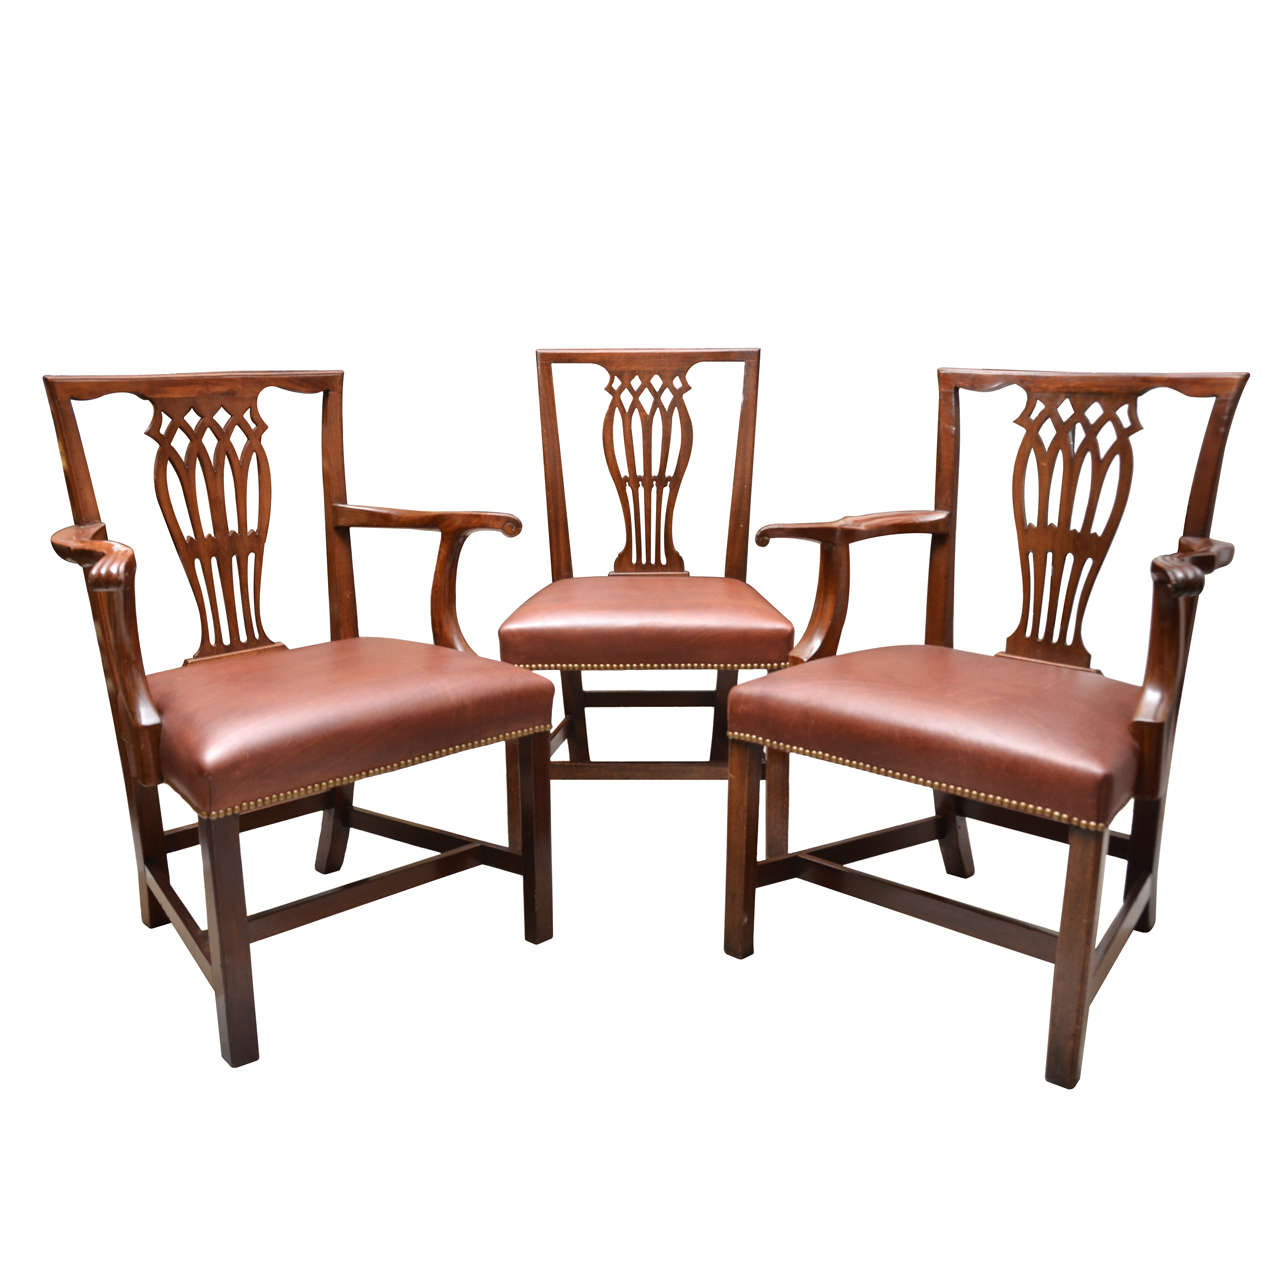 Late 18th-Early 19th Century English Set of 12 Mahogany Dining Chairs